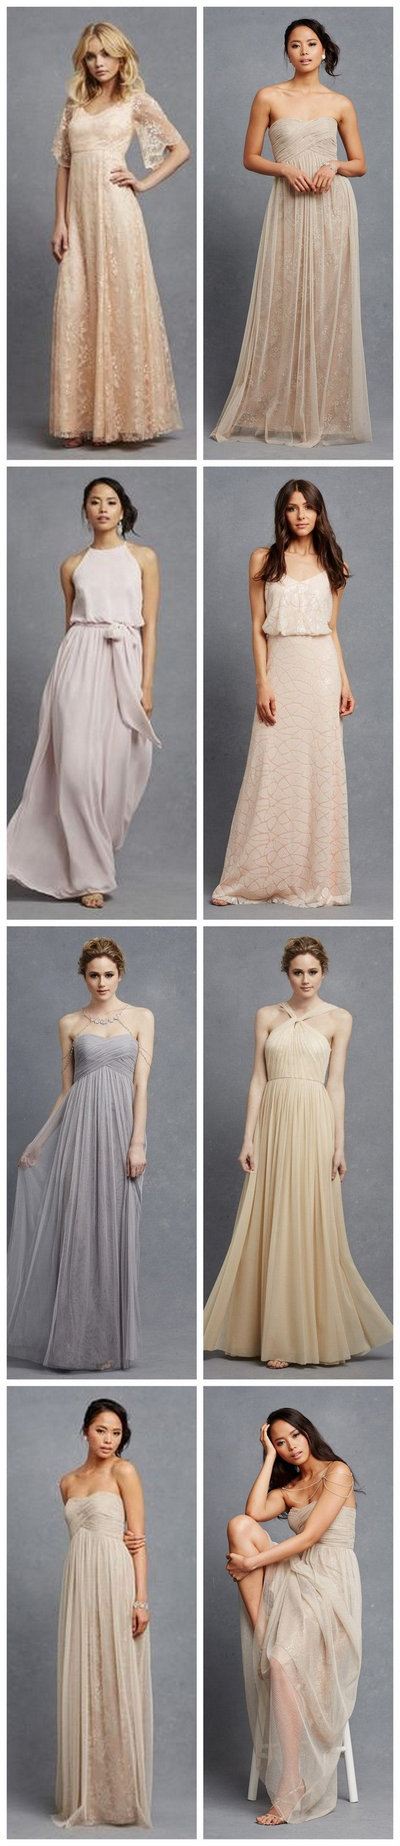 Chic, Neutral bridesmaid dresses in so many gorgeous silhouettes and fabrics!